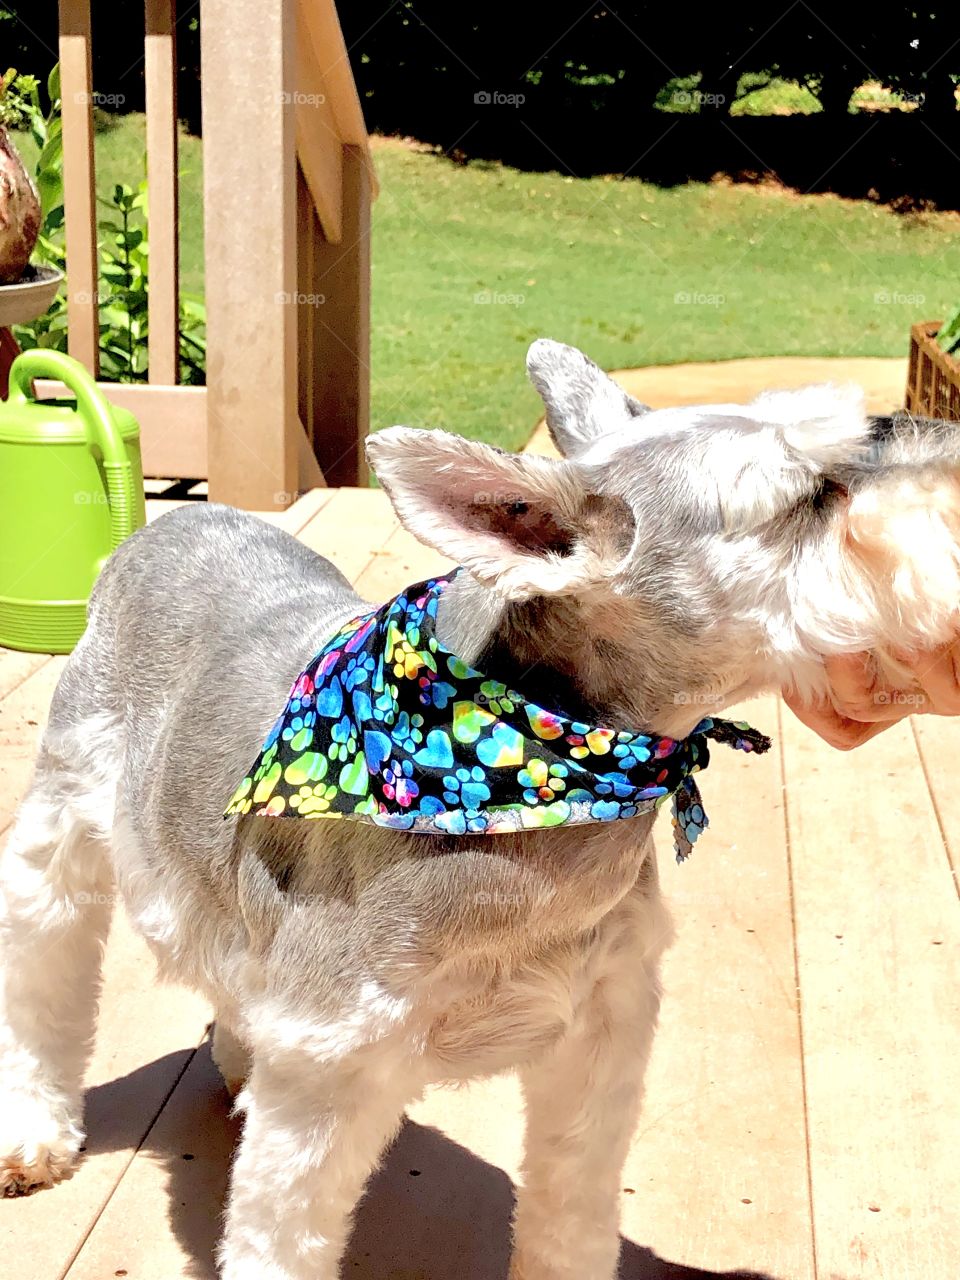 My beautiful baby boy Schnauzer in his colorful bandanna after being freshly groomed.  